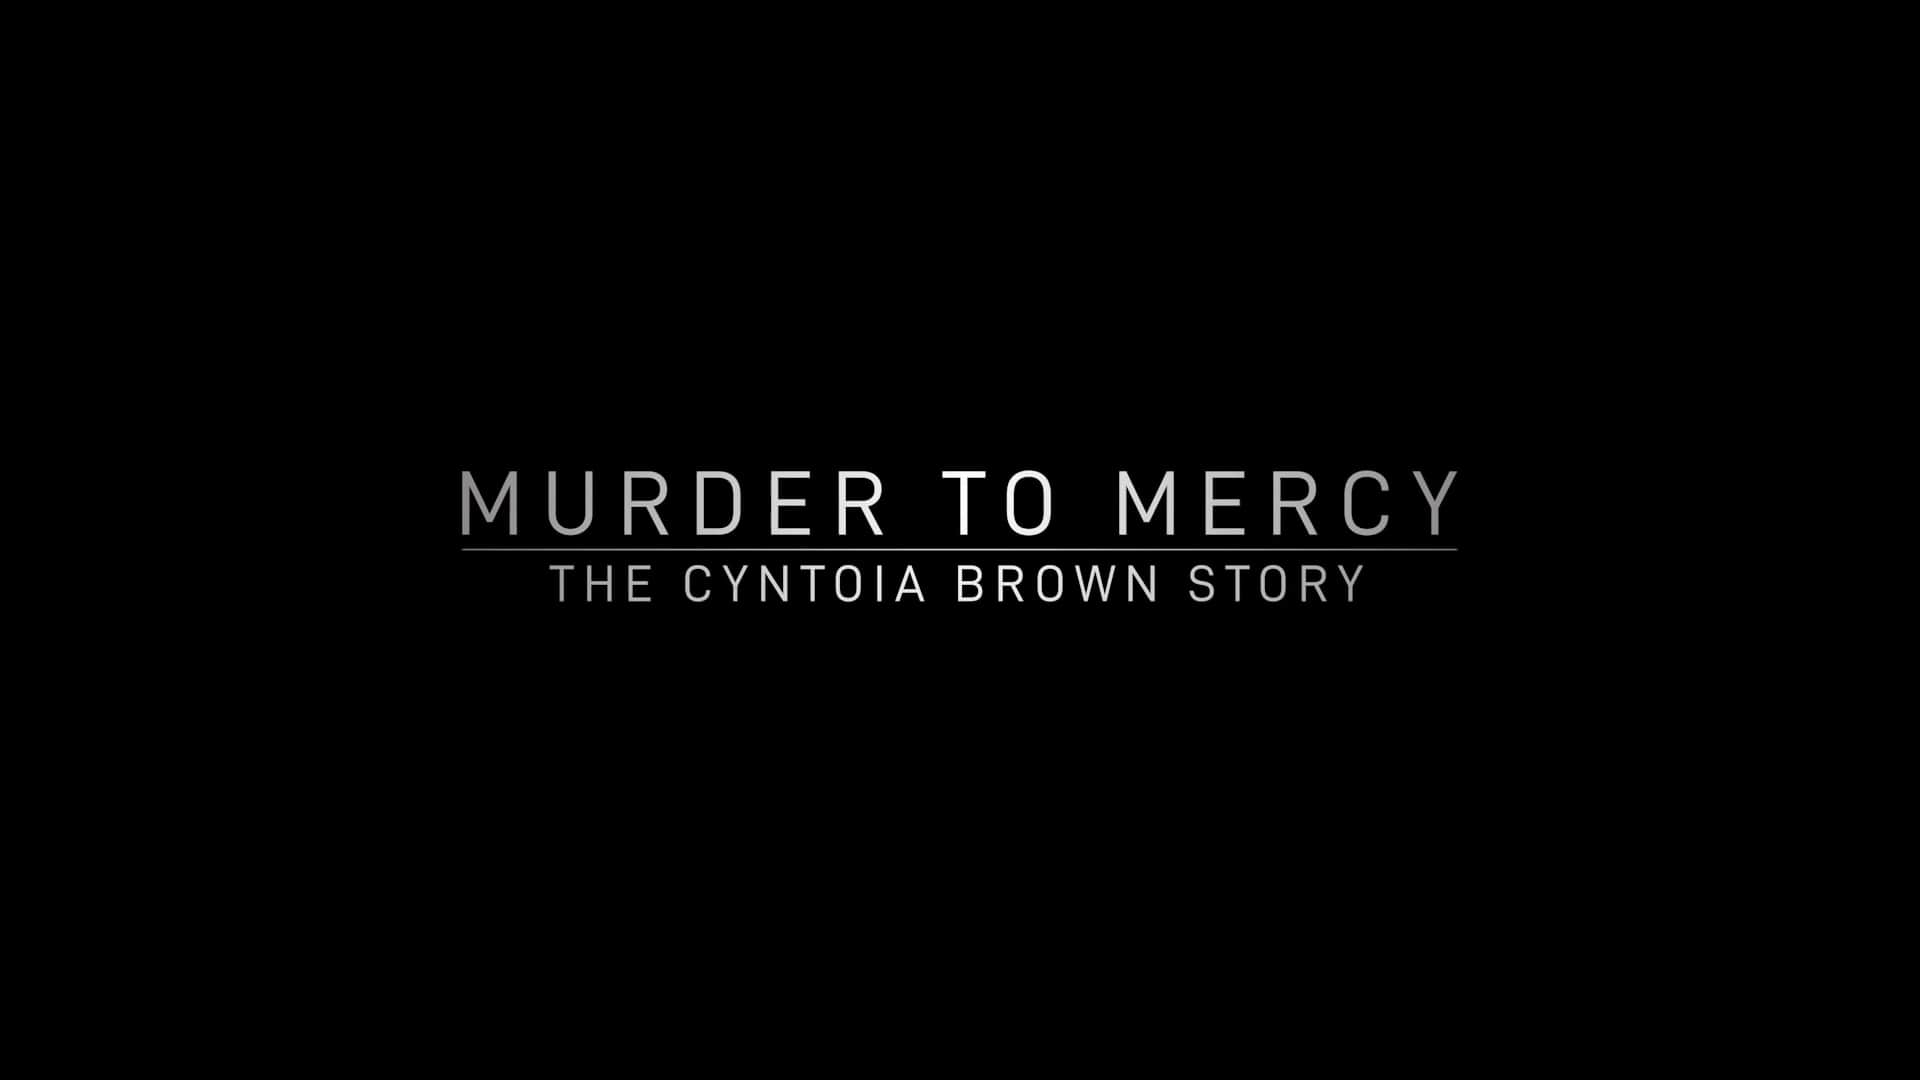 Murder To Mercy The Cyntoia Brown Story Netflix Trailer, Netflix Crime Documentary, Netflix Crime Docs, Coming to Netflix in April 2020